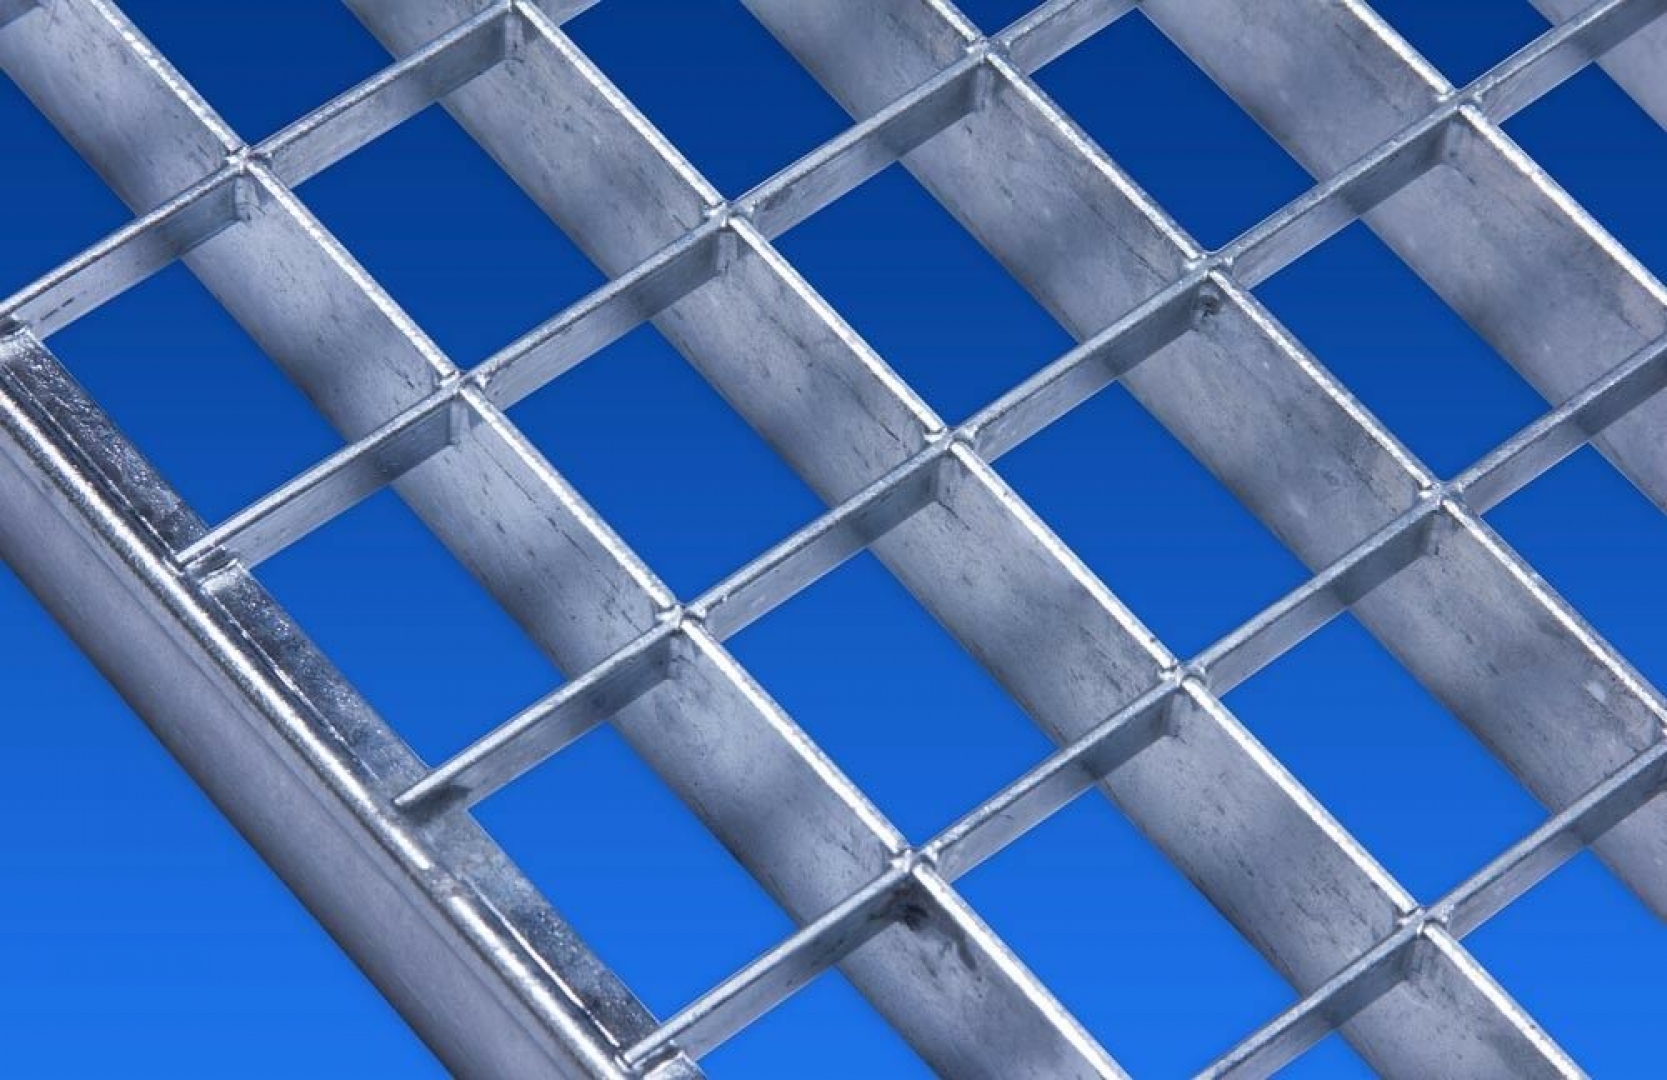 Baunorm Grating 390x690mm galvanized mesh size 30x30mm height 20mm without frame